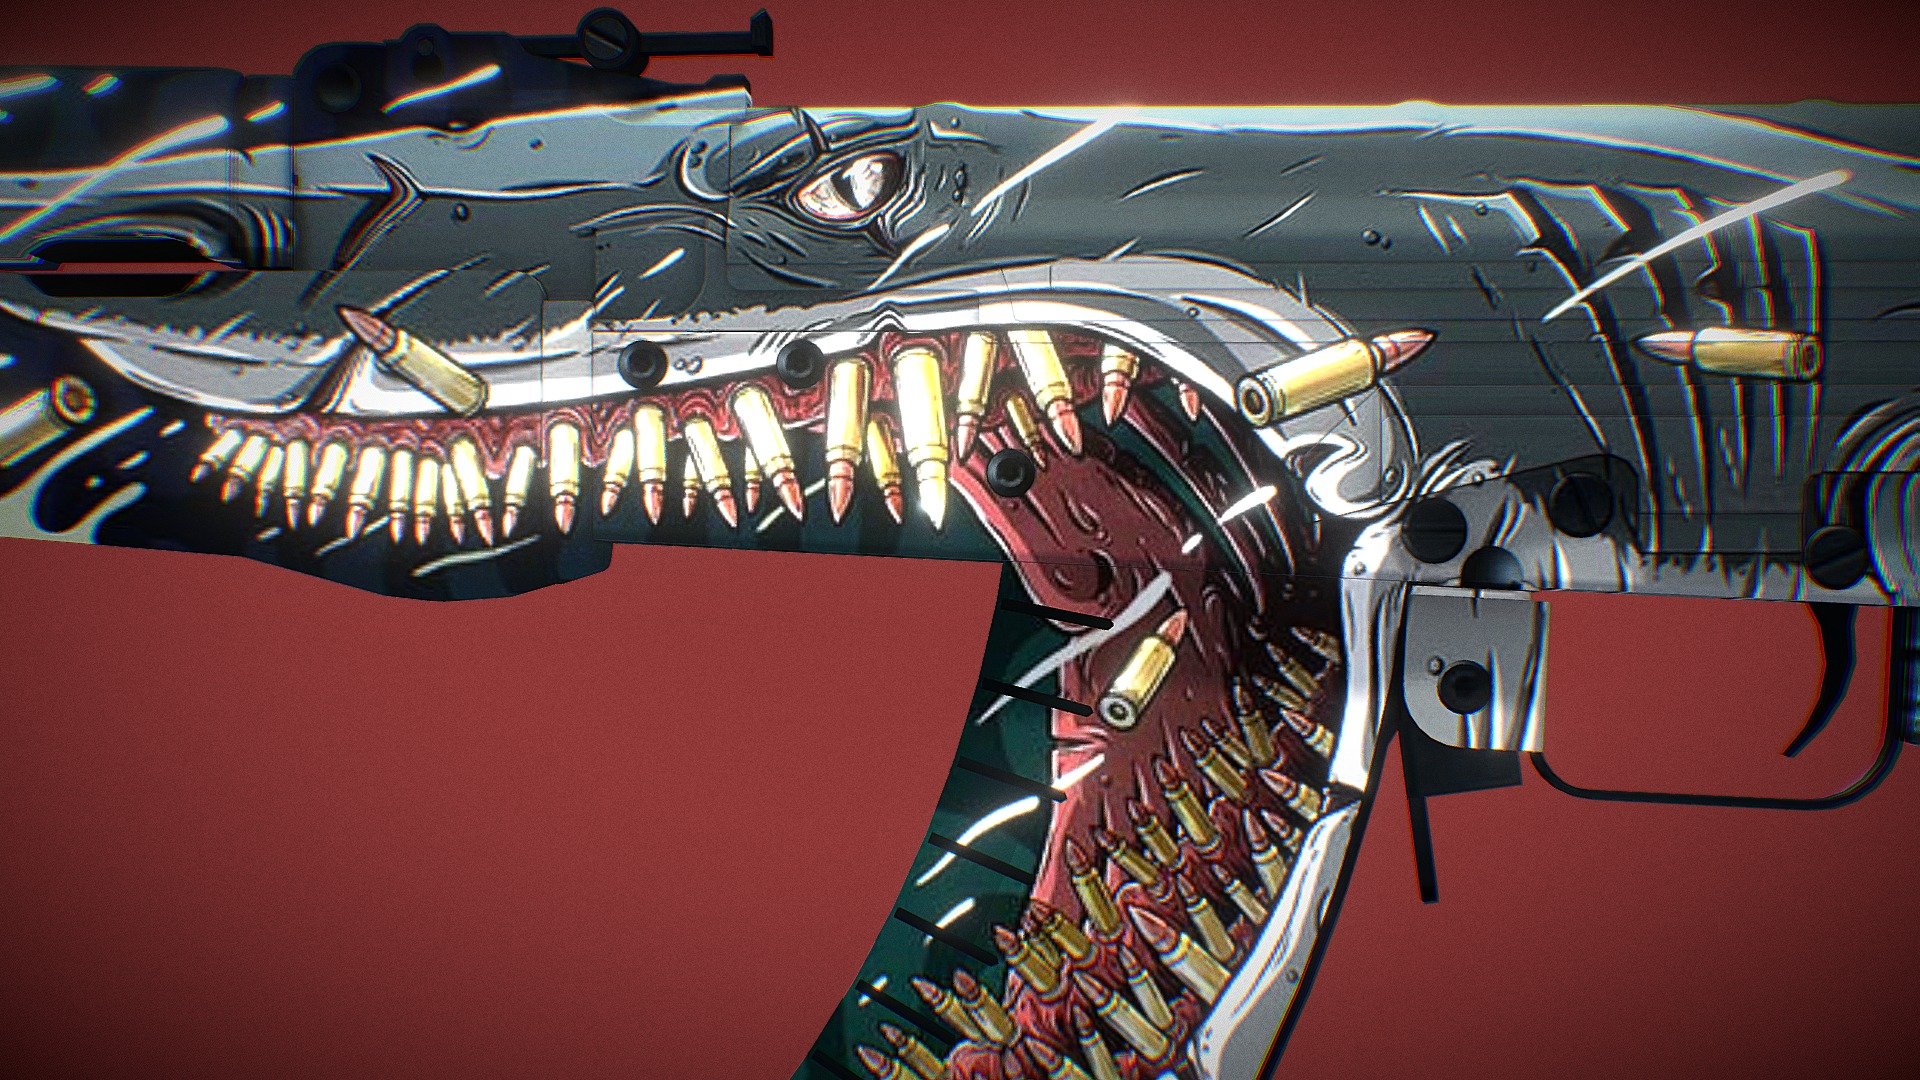 Rework of my AK-47 Shark for CS:GO
https://steamcommunity.com/sharedfiles/filedetails/?id=2009063498

Uploaded in low quality to avoid skin theft.
Original model by Valve Corp 3d model